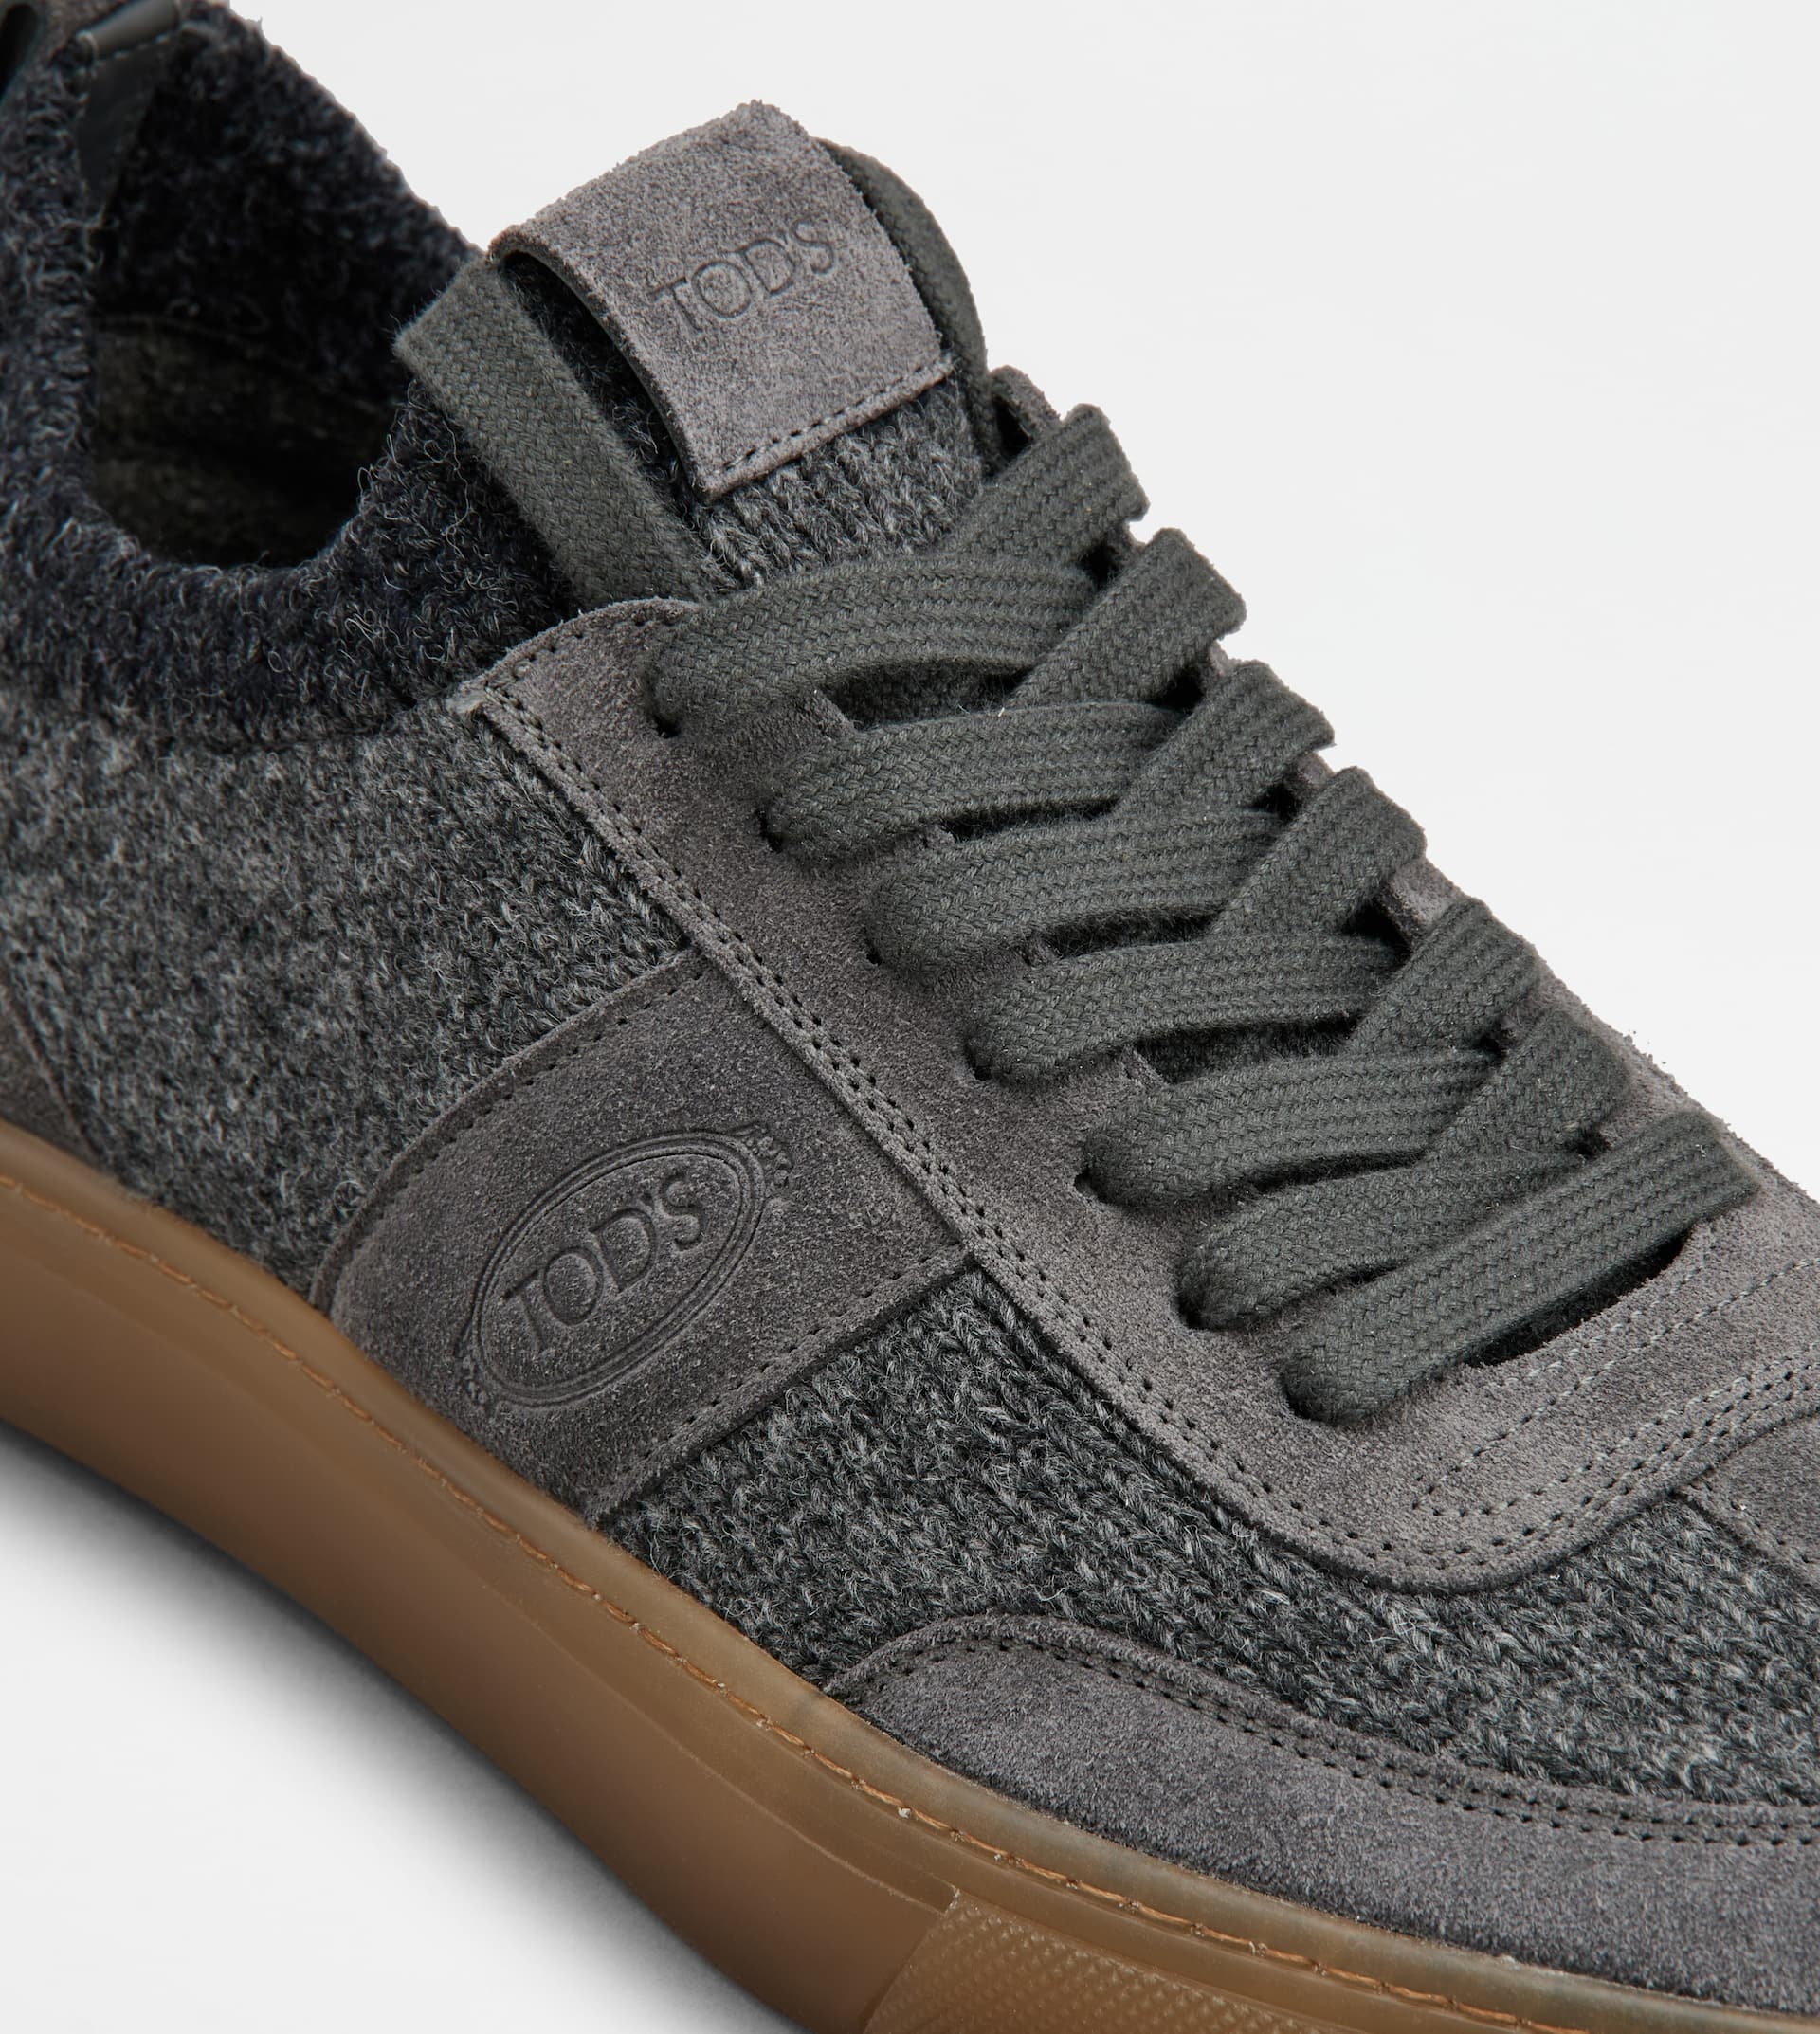 SNEAKERS IN SUEDE AD KNIT - GREY - 6